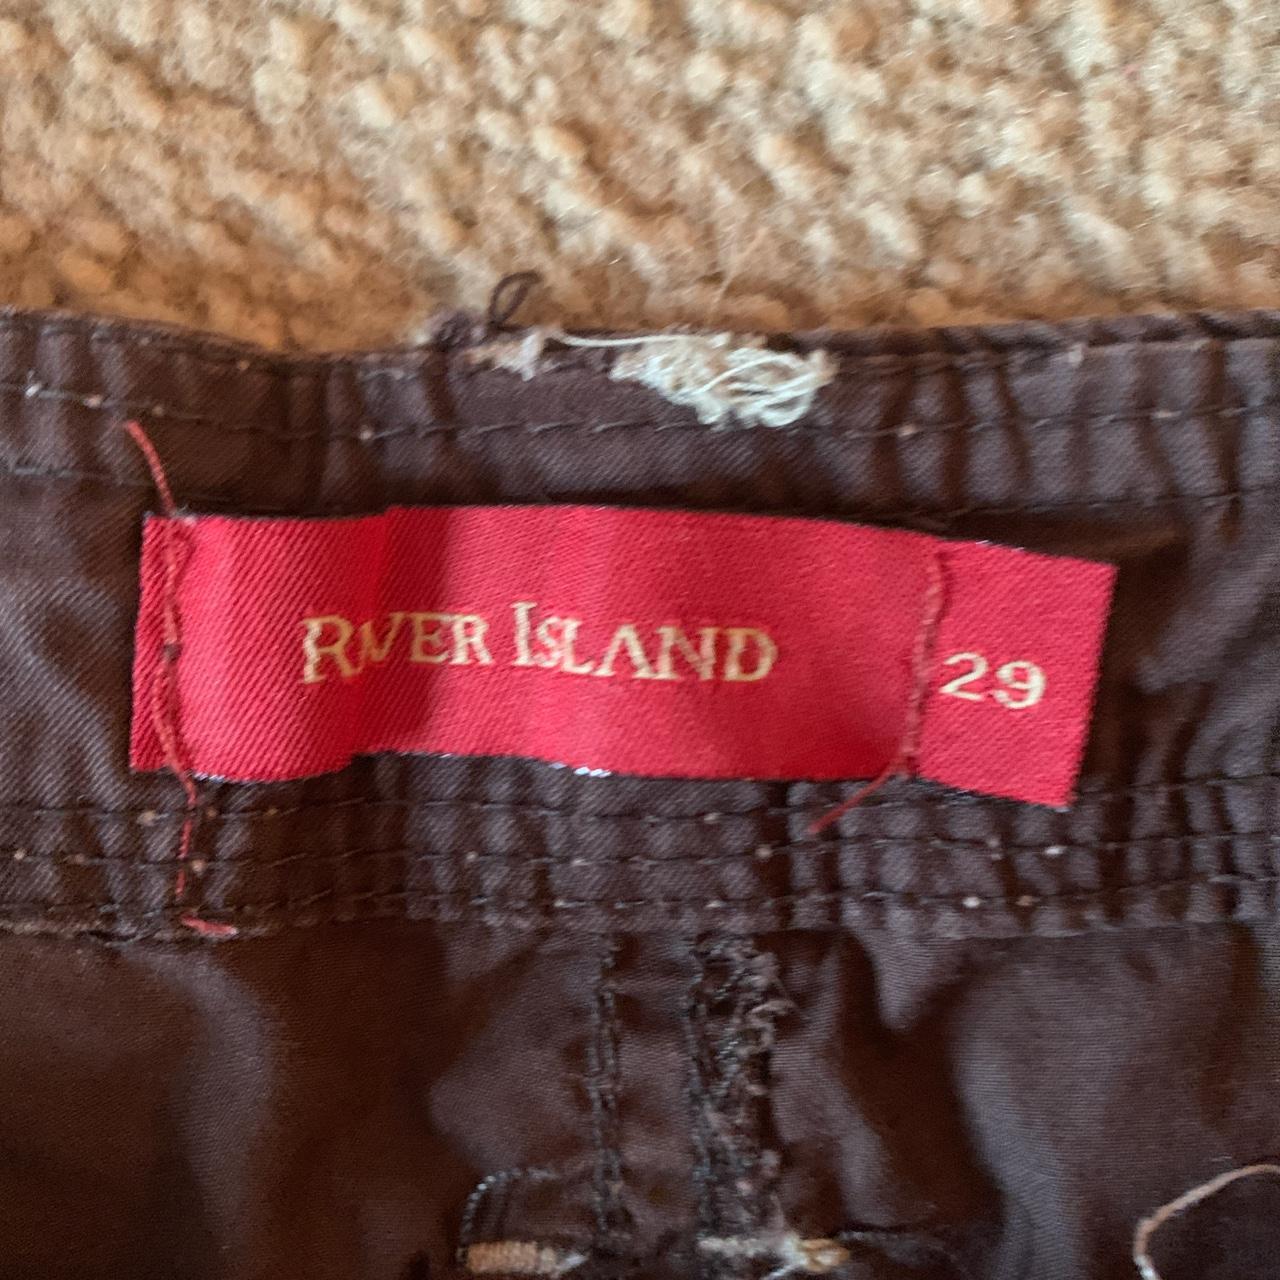 River Island Men's Brown and Khaki Jeans (4)